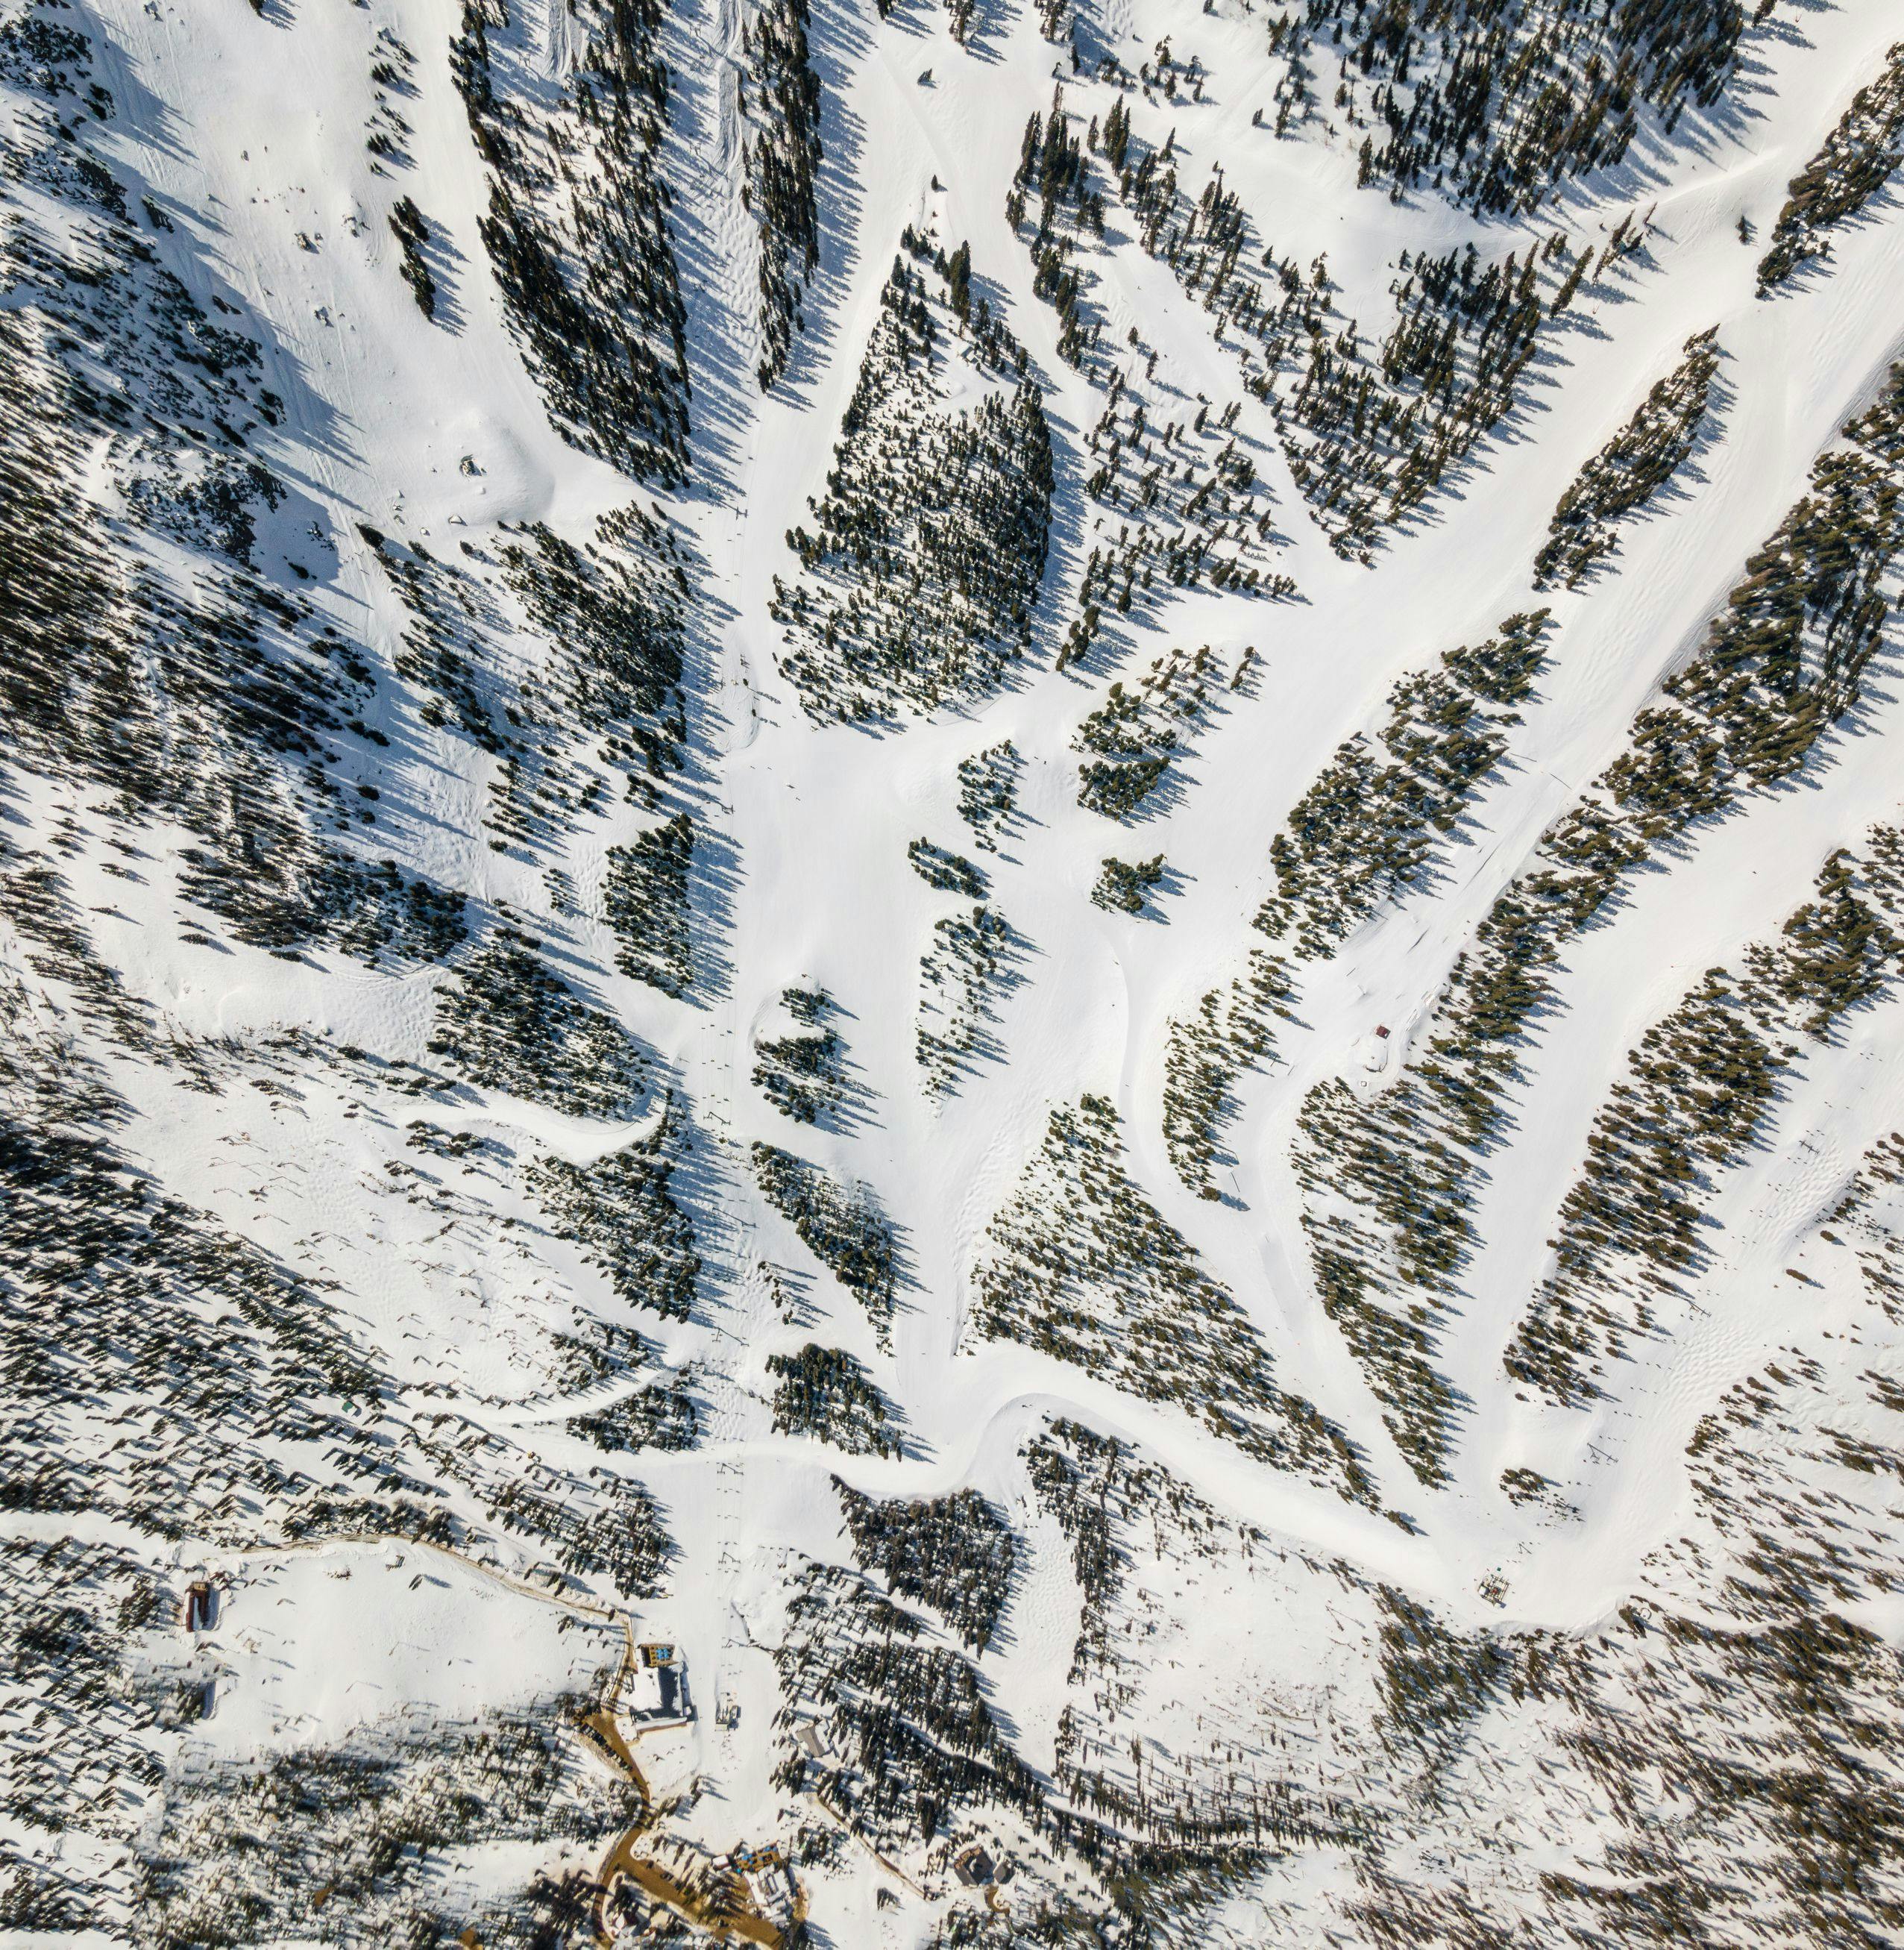 A drone shot from high above of ski trails at Taos Ski Valley